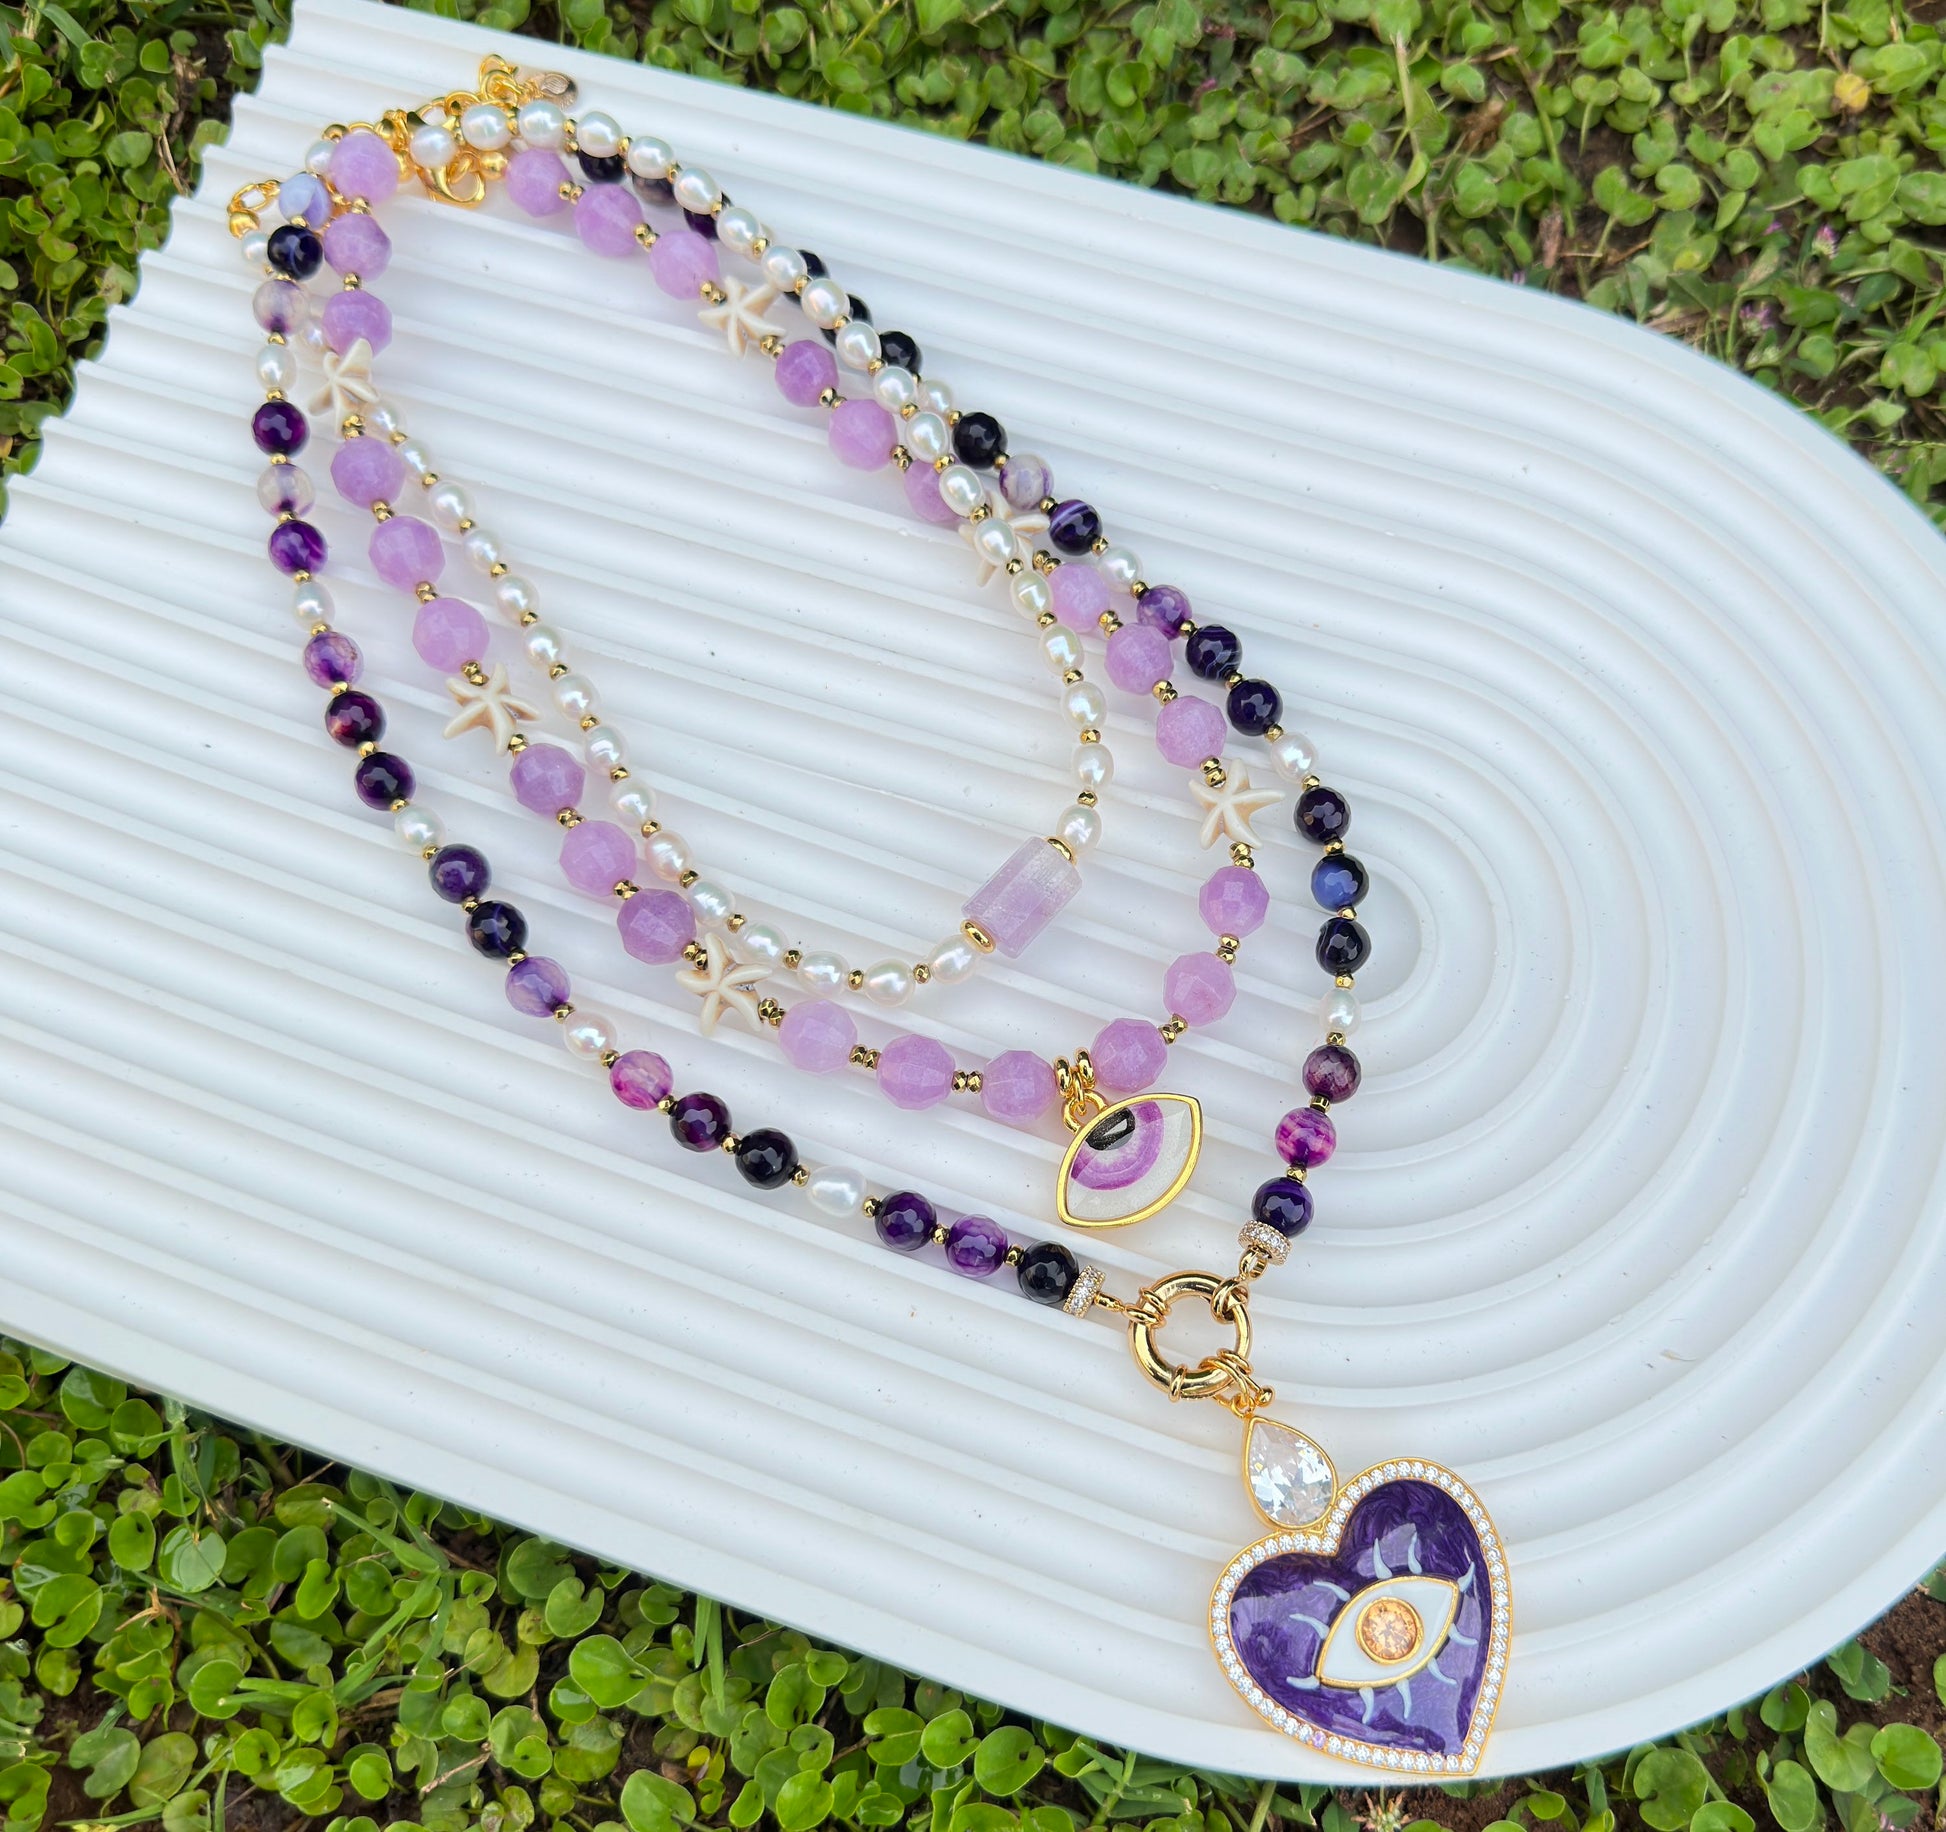 Evil Eye Necklace, Pearl and Agate Jewelry, Purple Multistrand Gemstone Necklace, Birthday Gift, Protection Necklace, Summer Jewelry